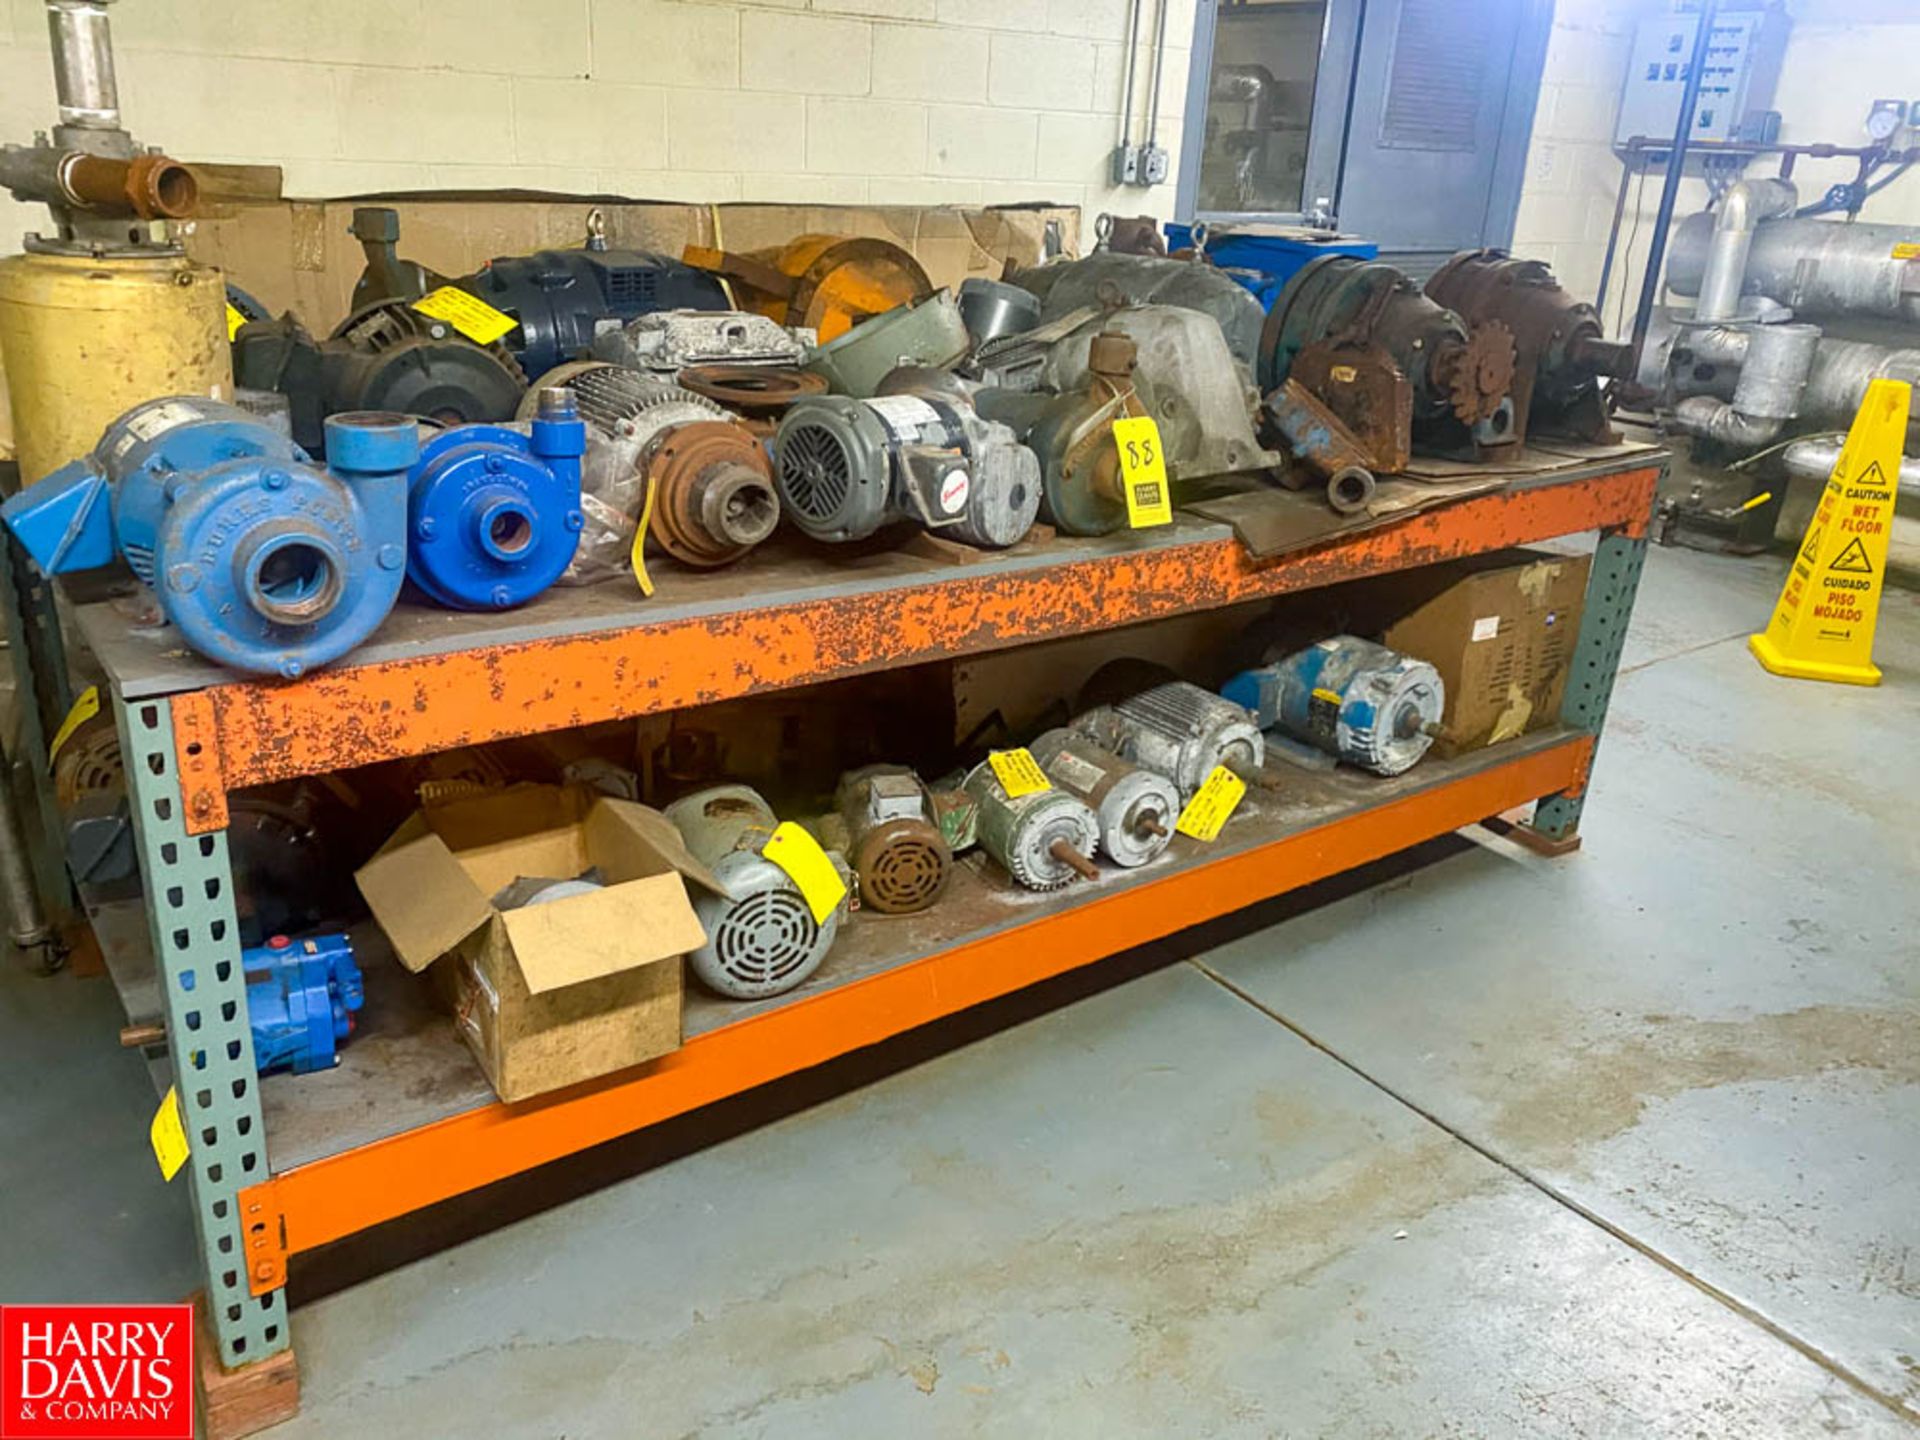 Gear Reducing Drives Motors And Pumps Rigging Fee: $50